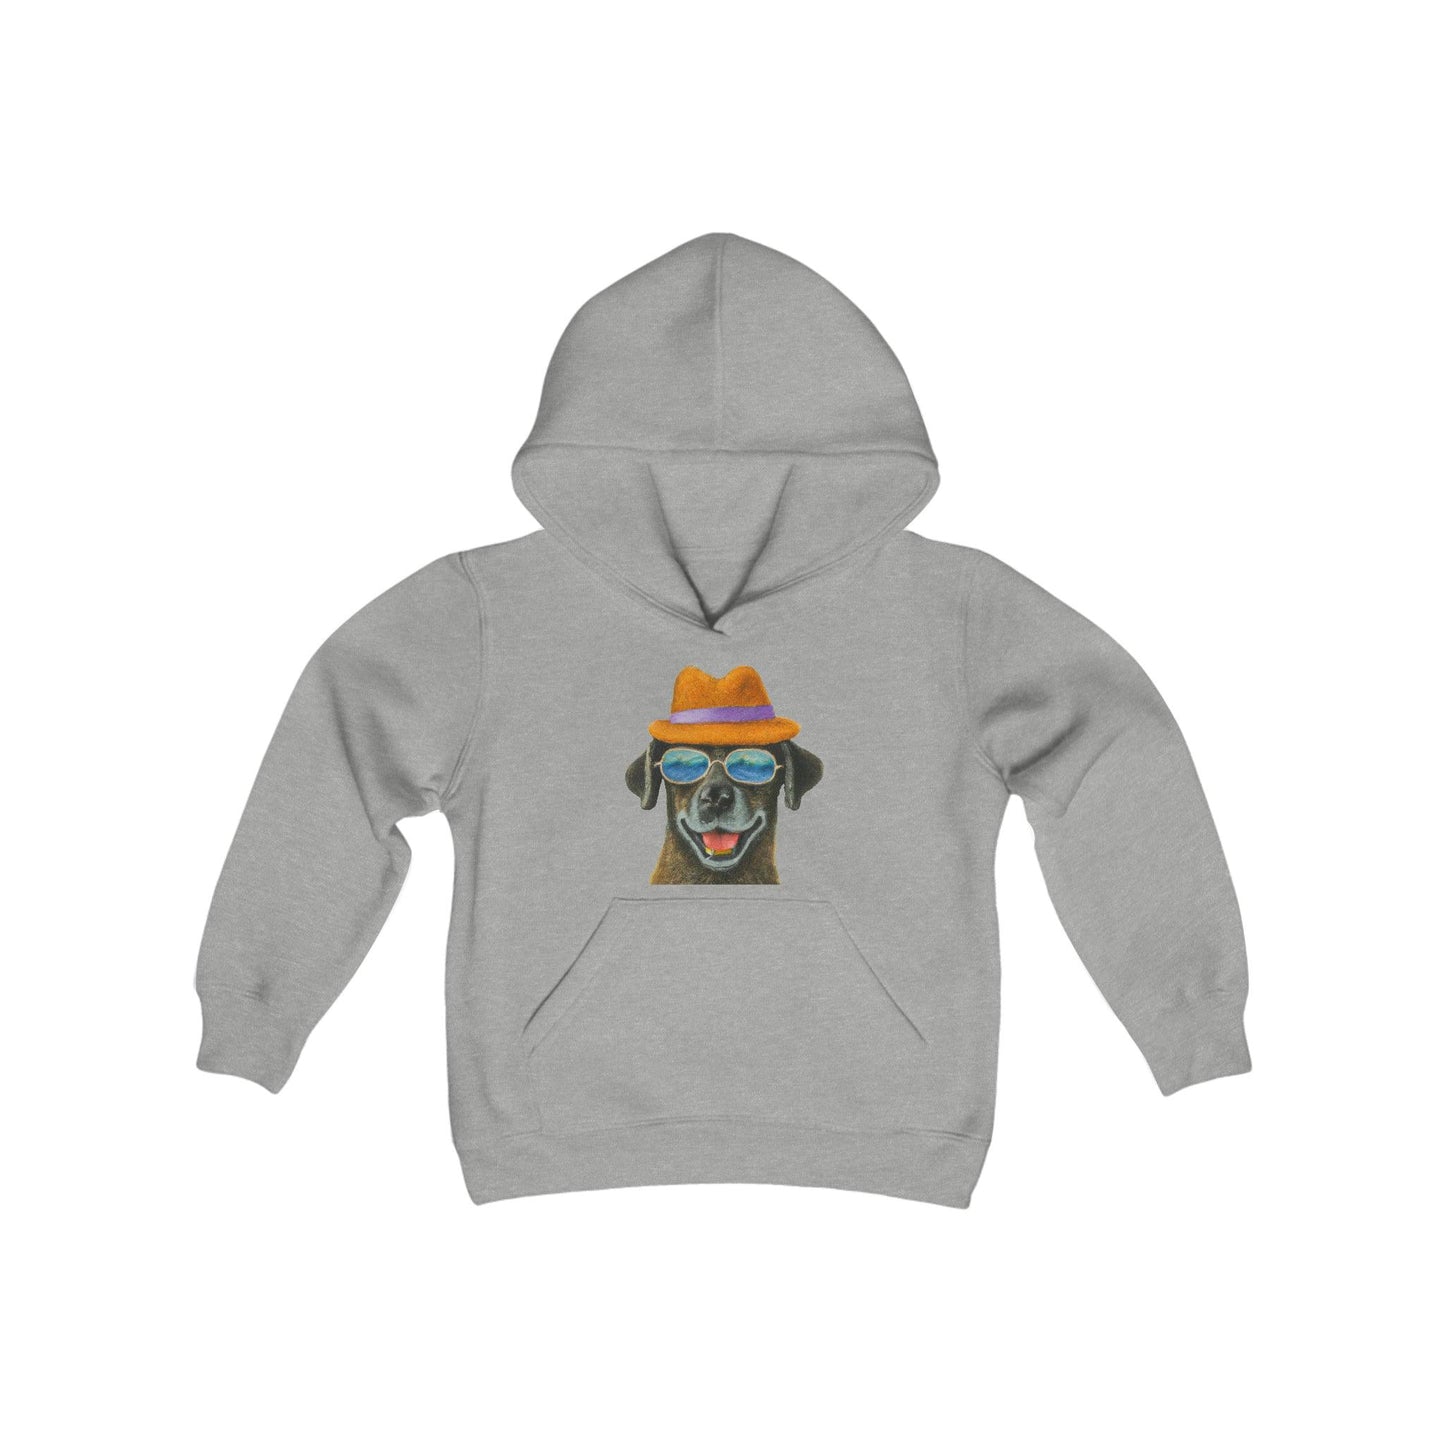 Dog at the beach wearing a hat and sunglasses painted art Youth Heavy Blend Hooded Sweatshirt - Giftsmojo